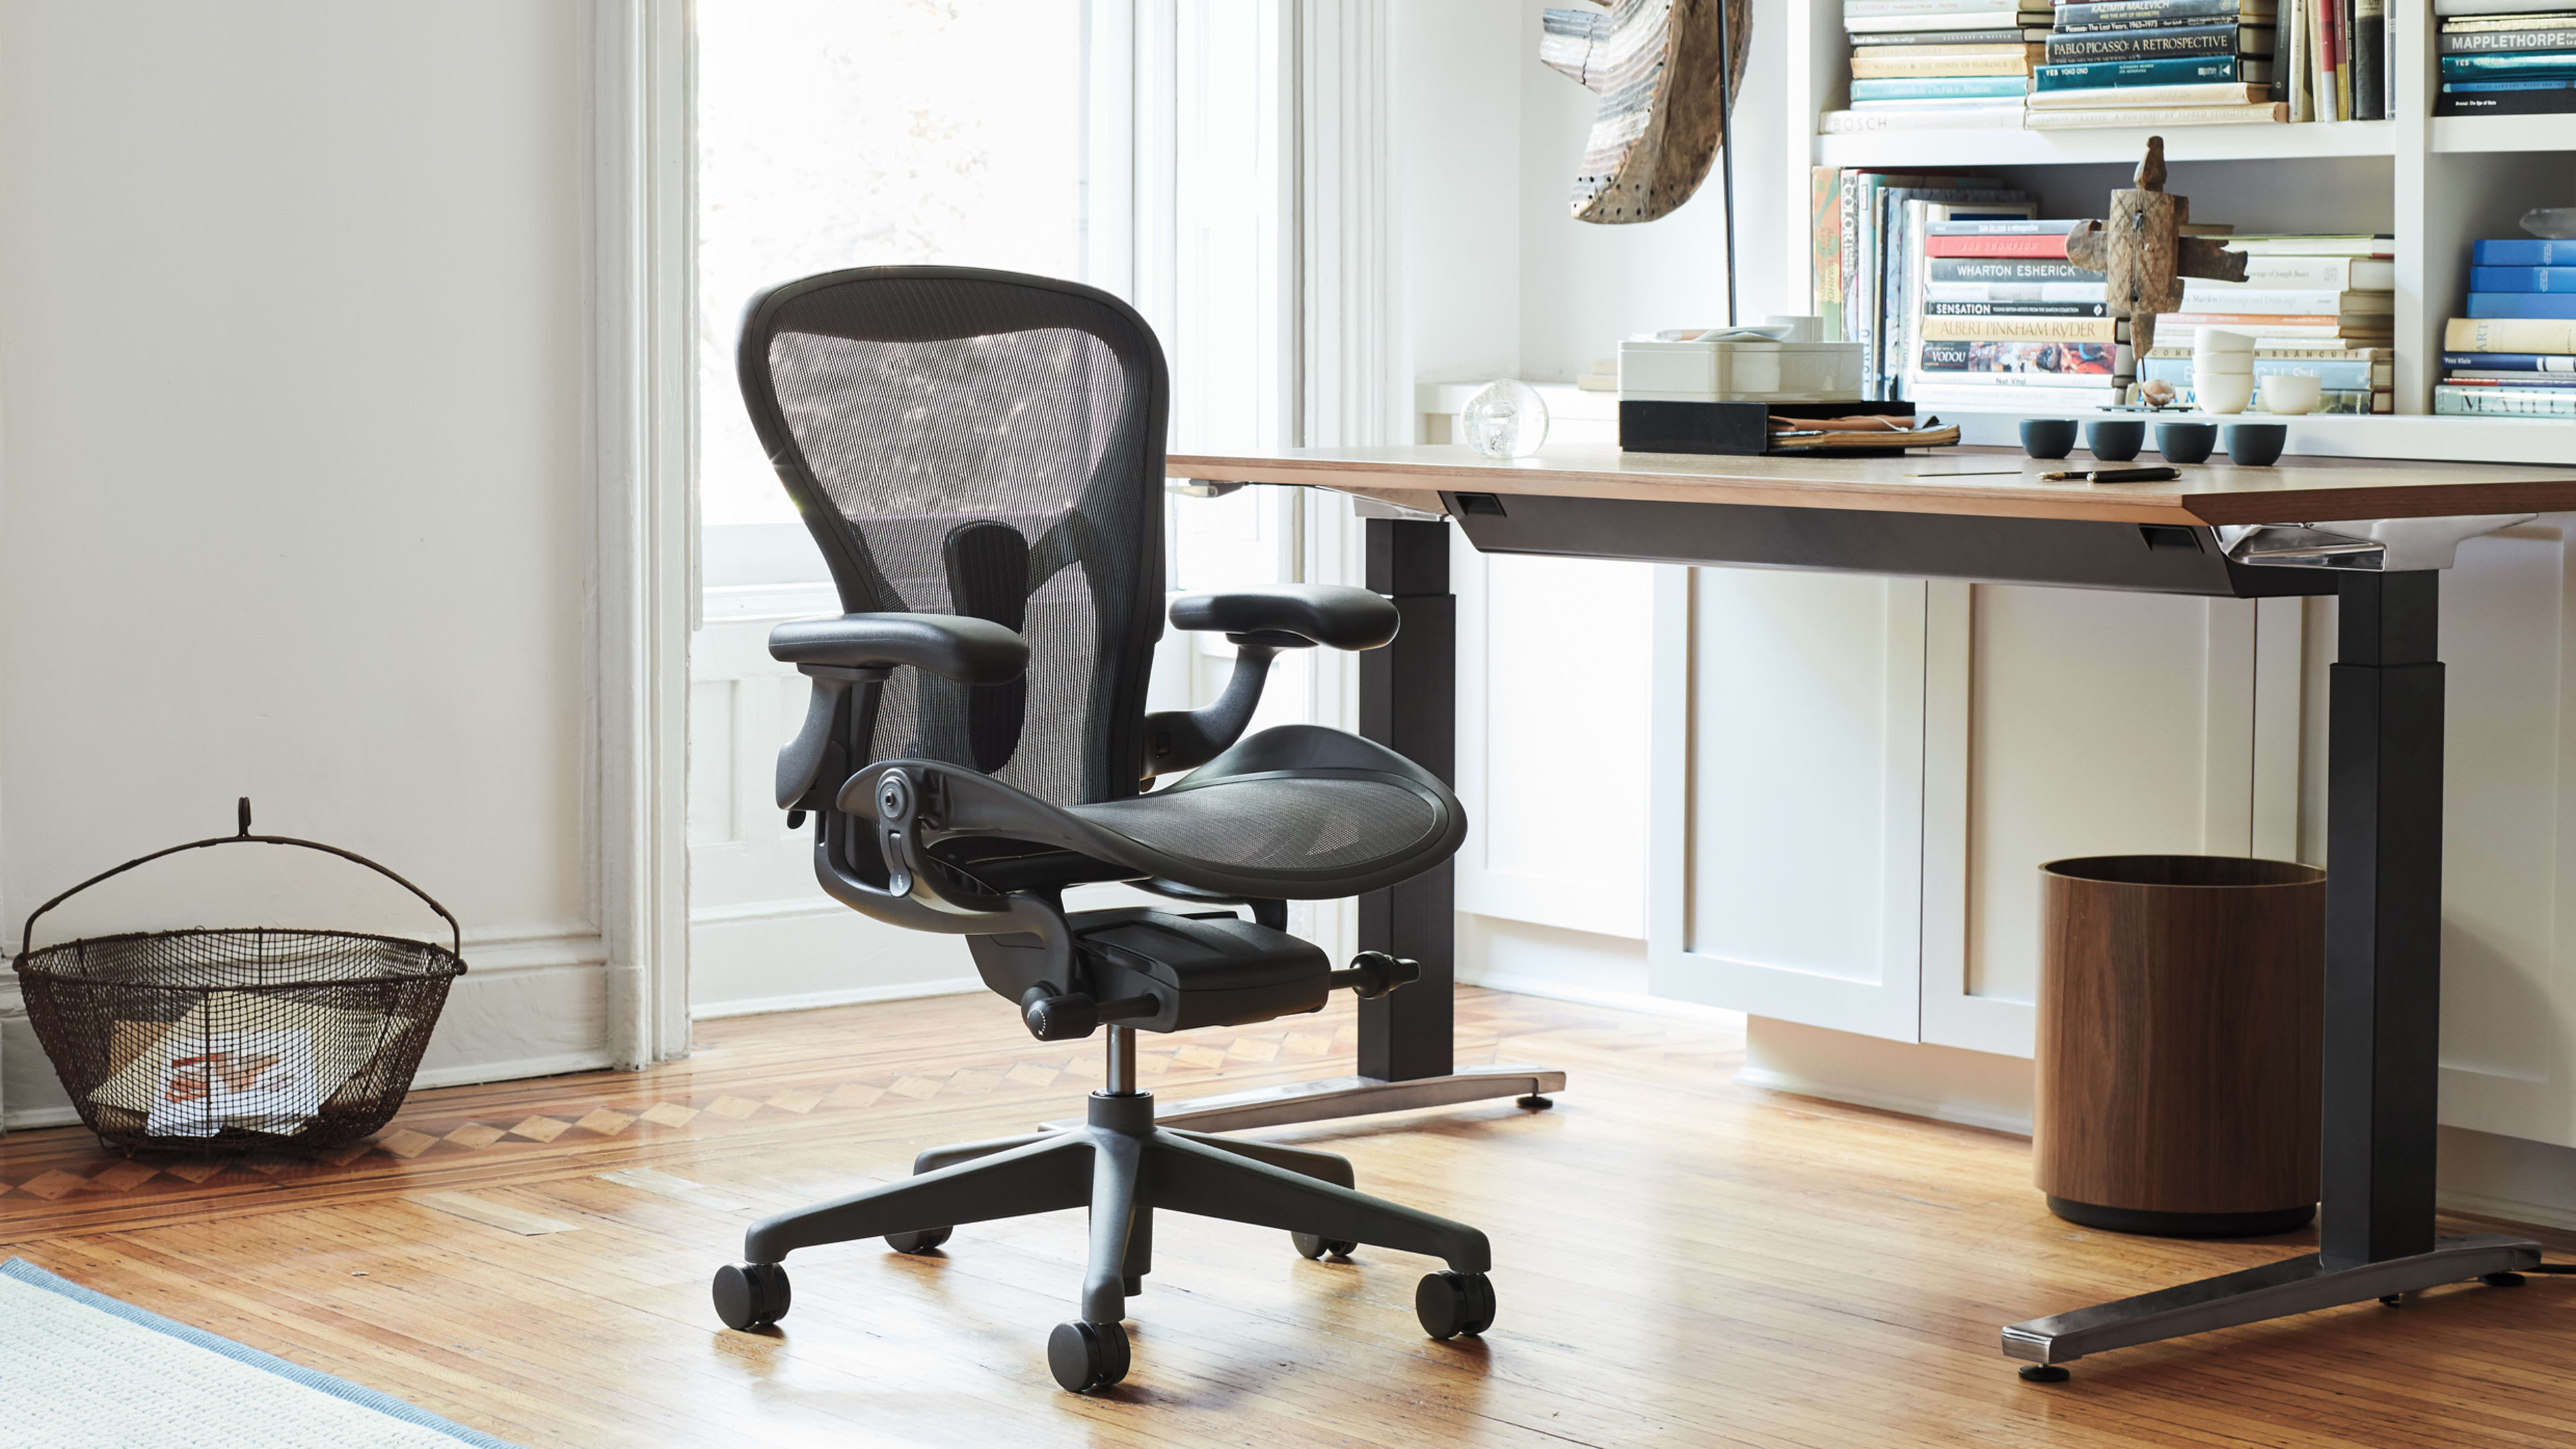 Is your home office wrecking your body? This Herman Miller quiz will help you fix it